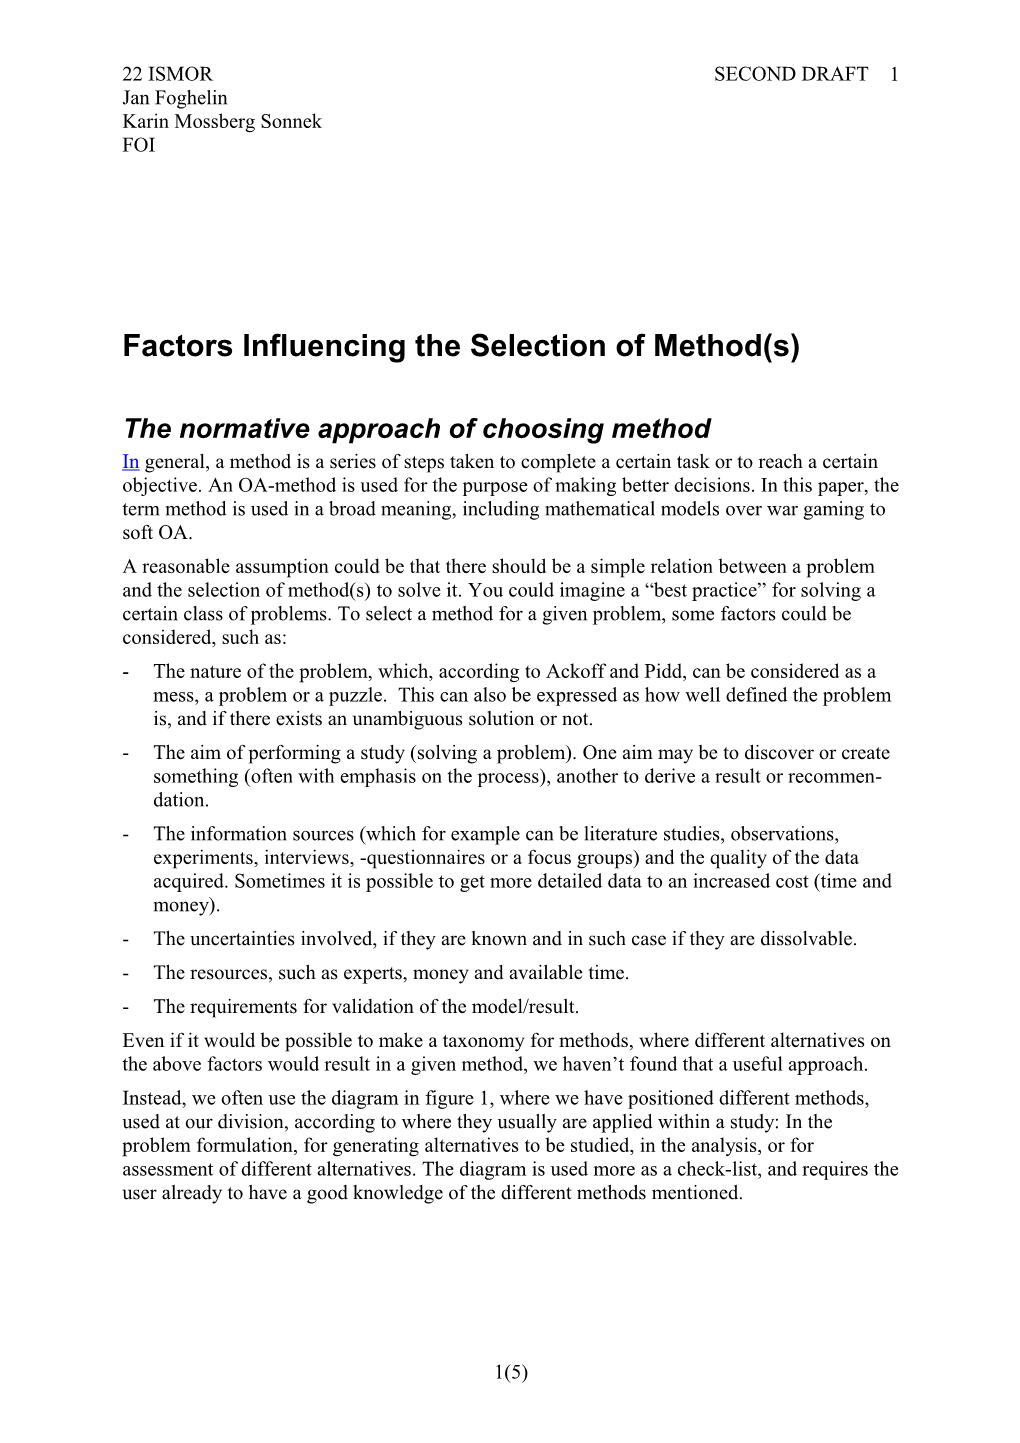 Factors Influencing the Selection of Method(S)